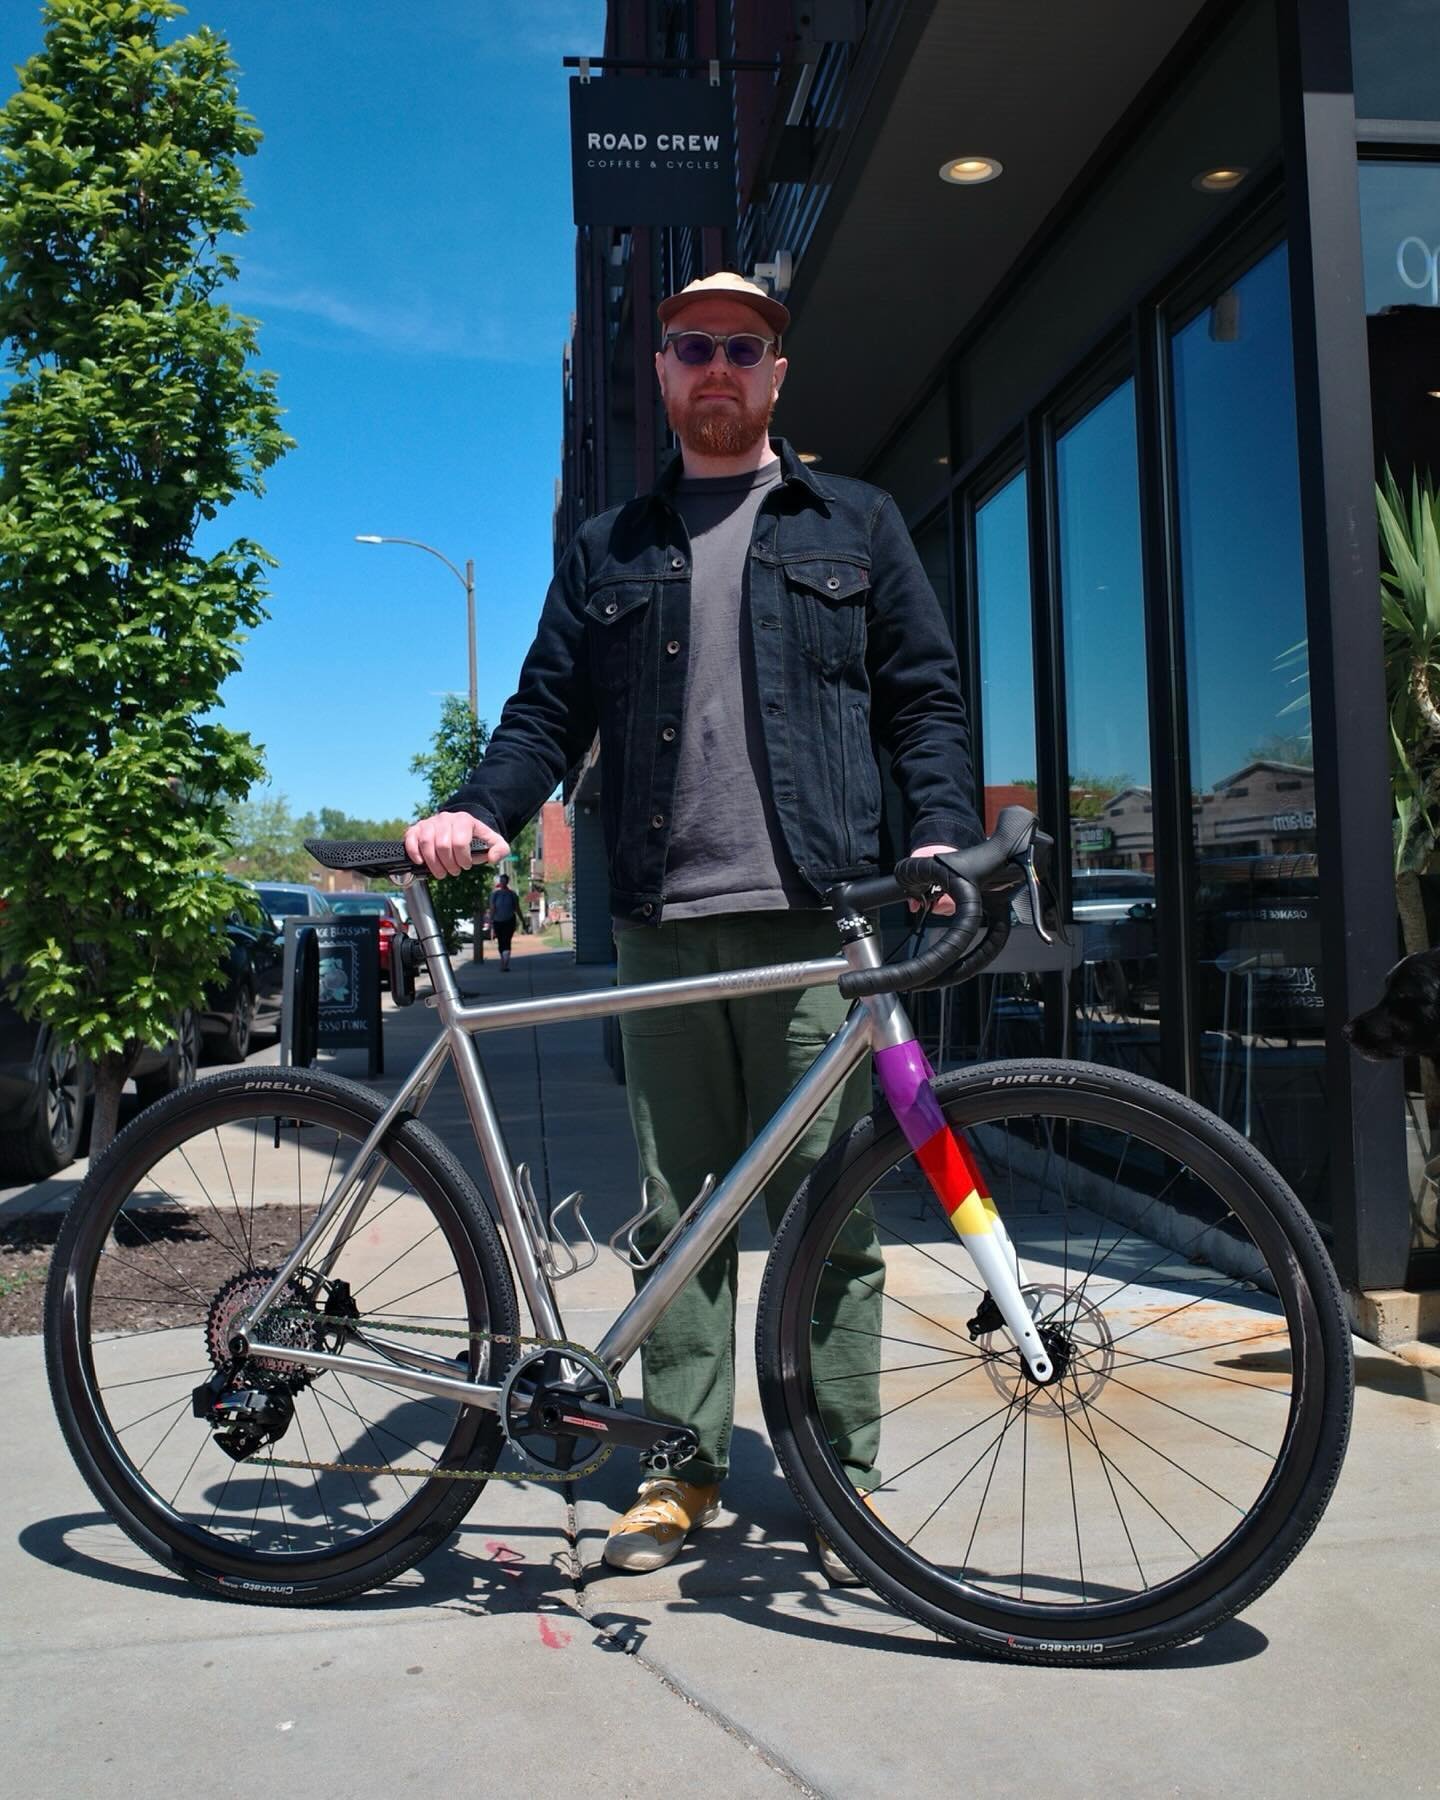 We had the pleasure of building this beautiful @blackheartbikeco for @ahowtheginge. He chose the Allroad Ti to be able to cover all of the bases. We&rsquo;re stoked on how this came out! 🥳🥳🥳

#roadcrewcc #blackheartbikeco #sram #custombuild #light